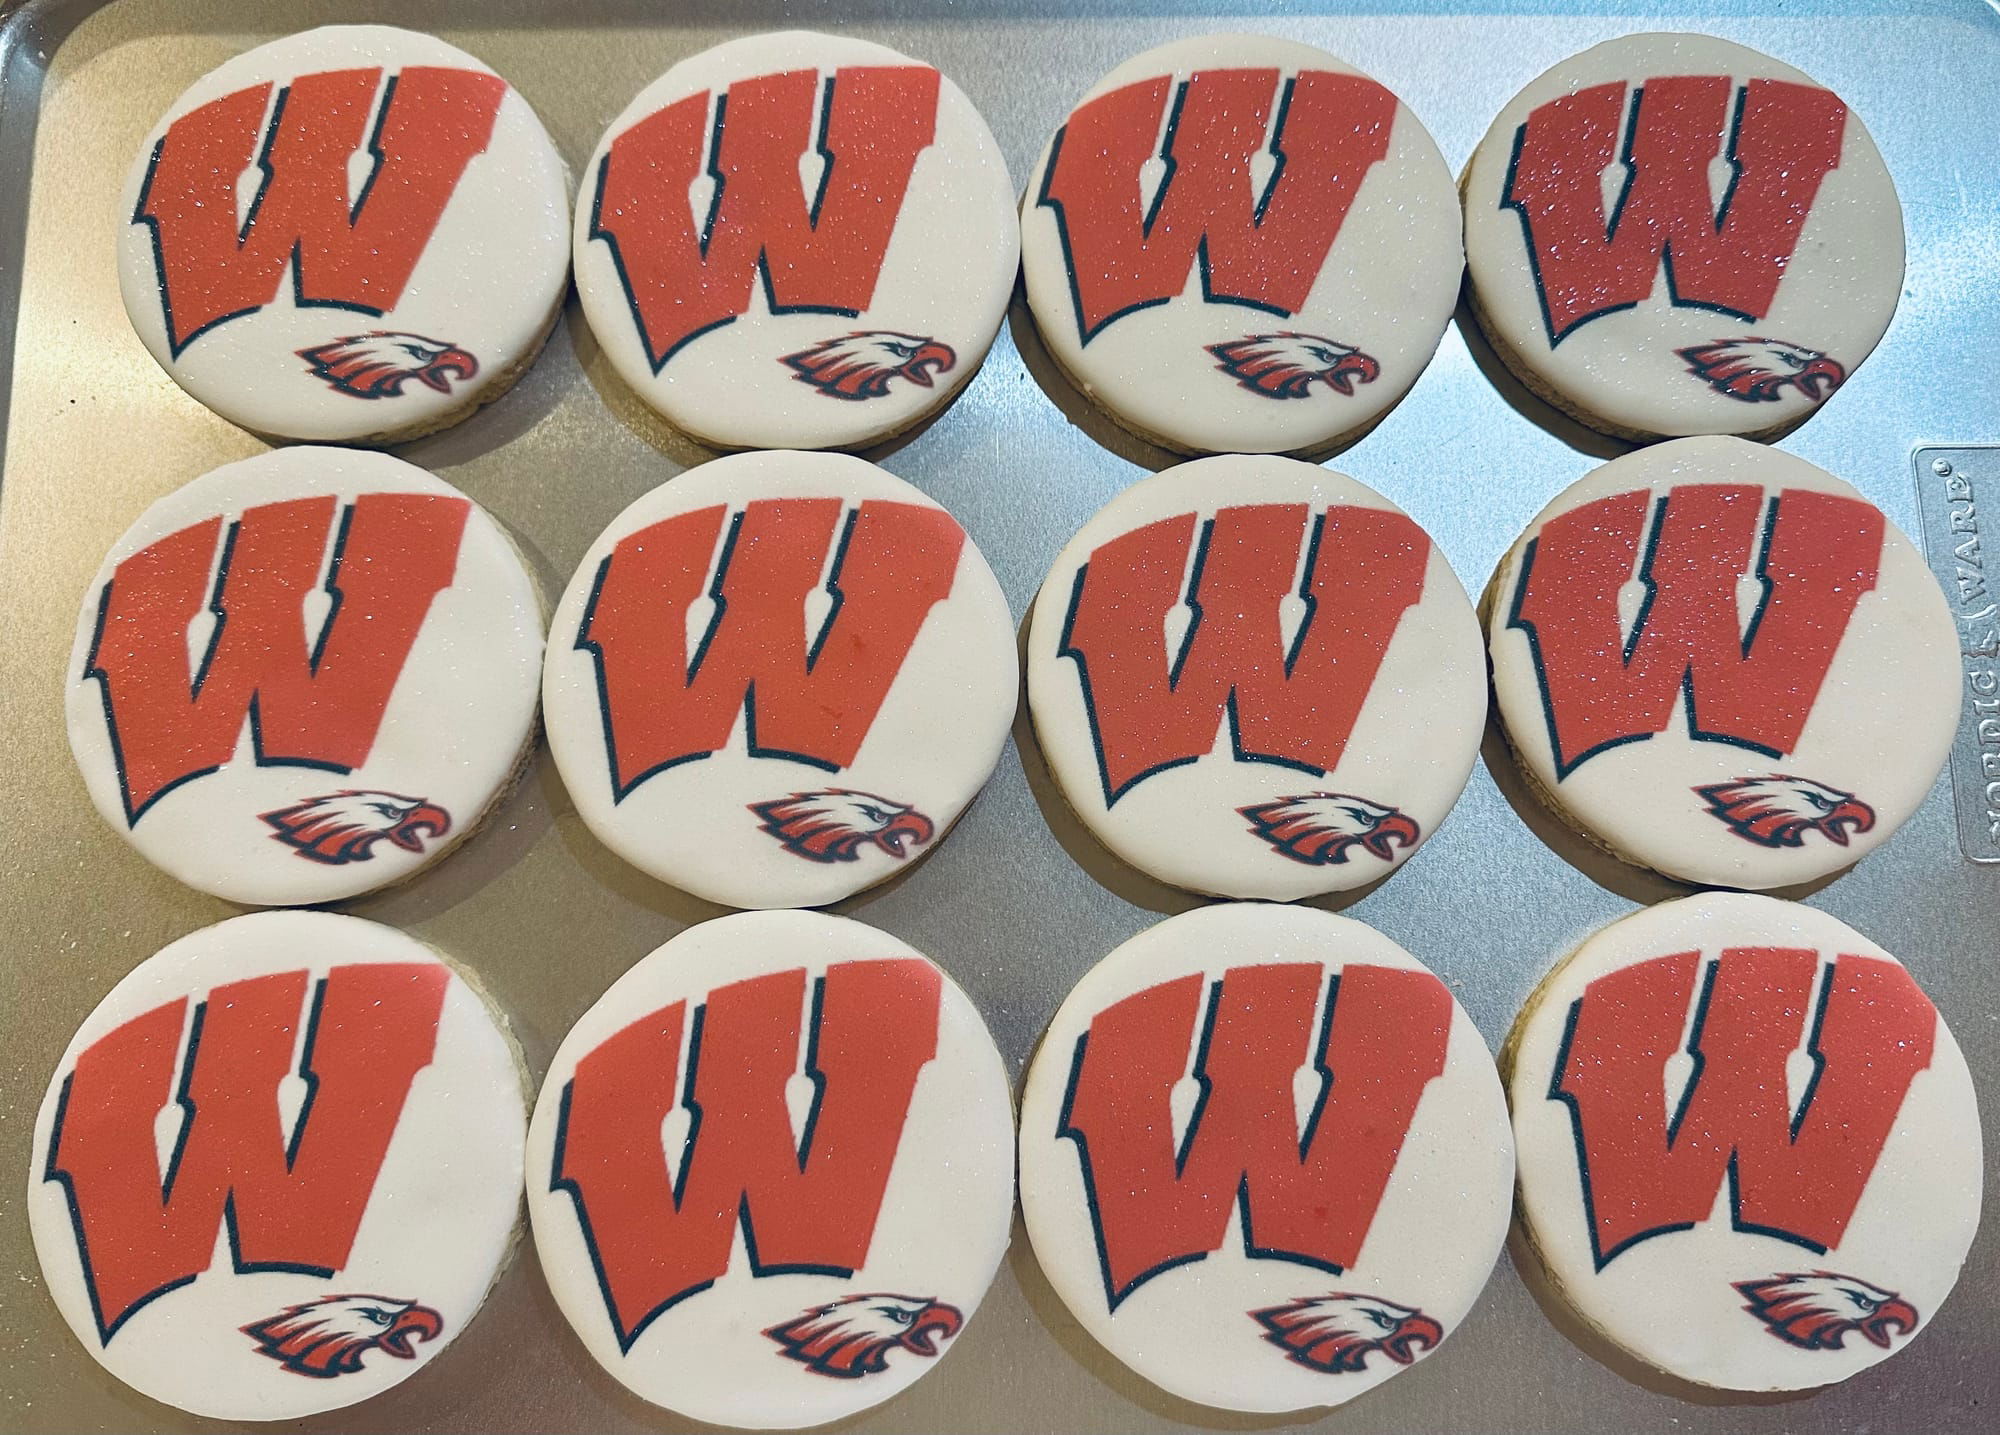 Westmoreland Eagles Royal Icing Sugar Cookies with Images